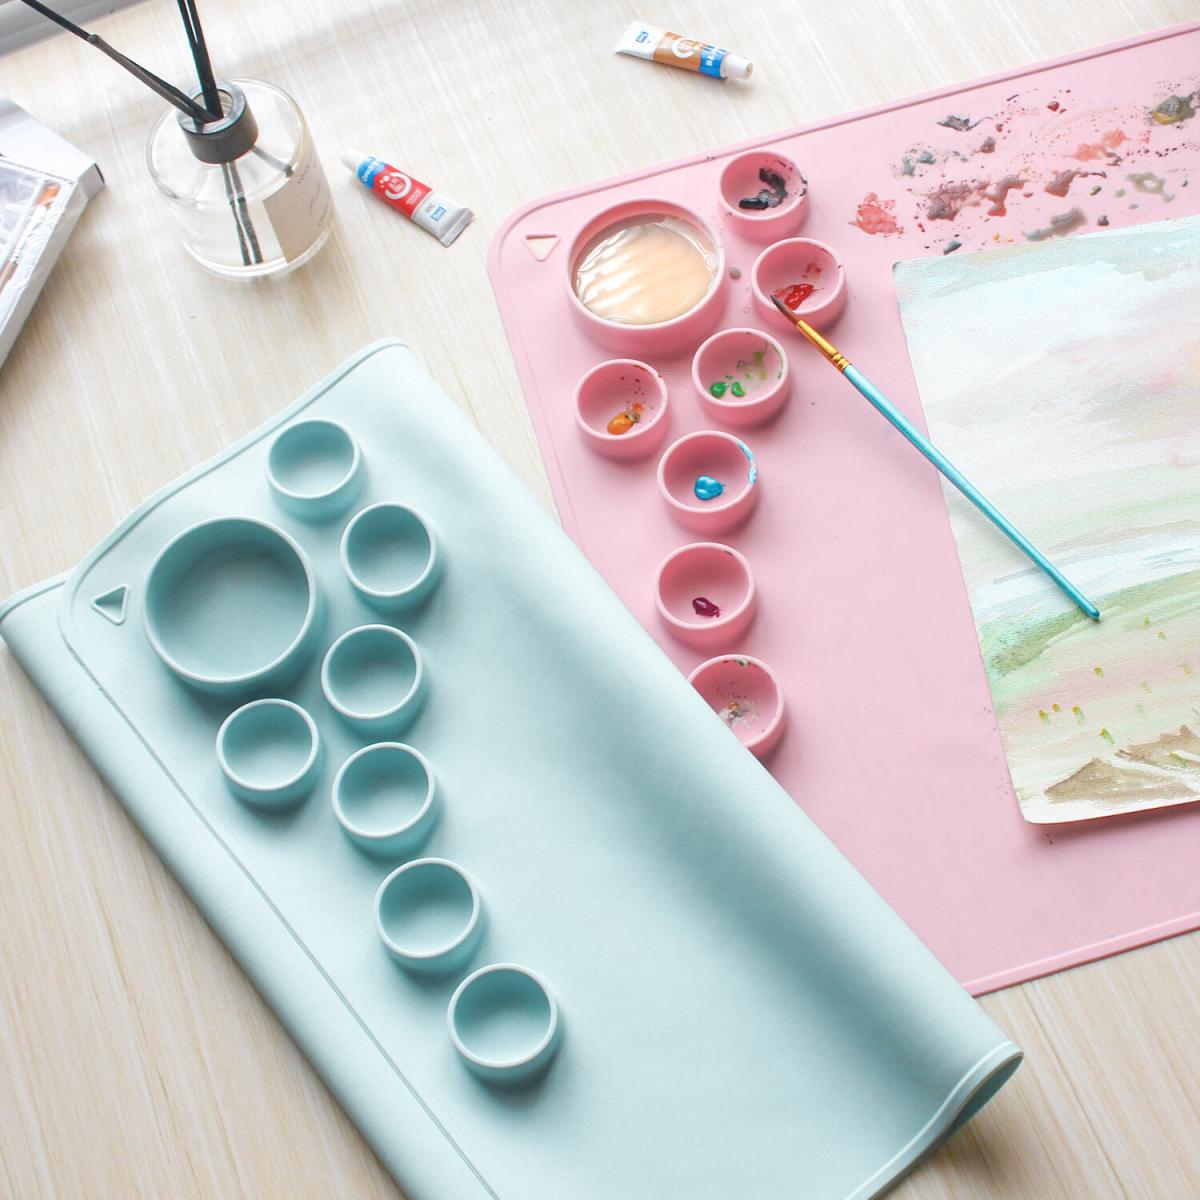 Silicone Painting Mat New Children's Painting Mat Toddler Art Supplies Creative DIY Painting Mat Sky Blue Anti-Slip Silicone Placemat